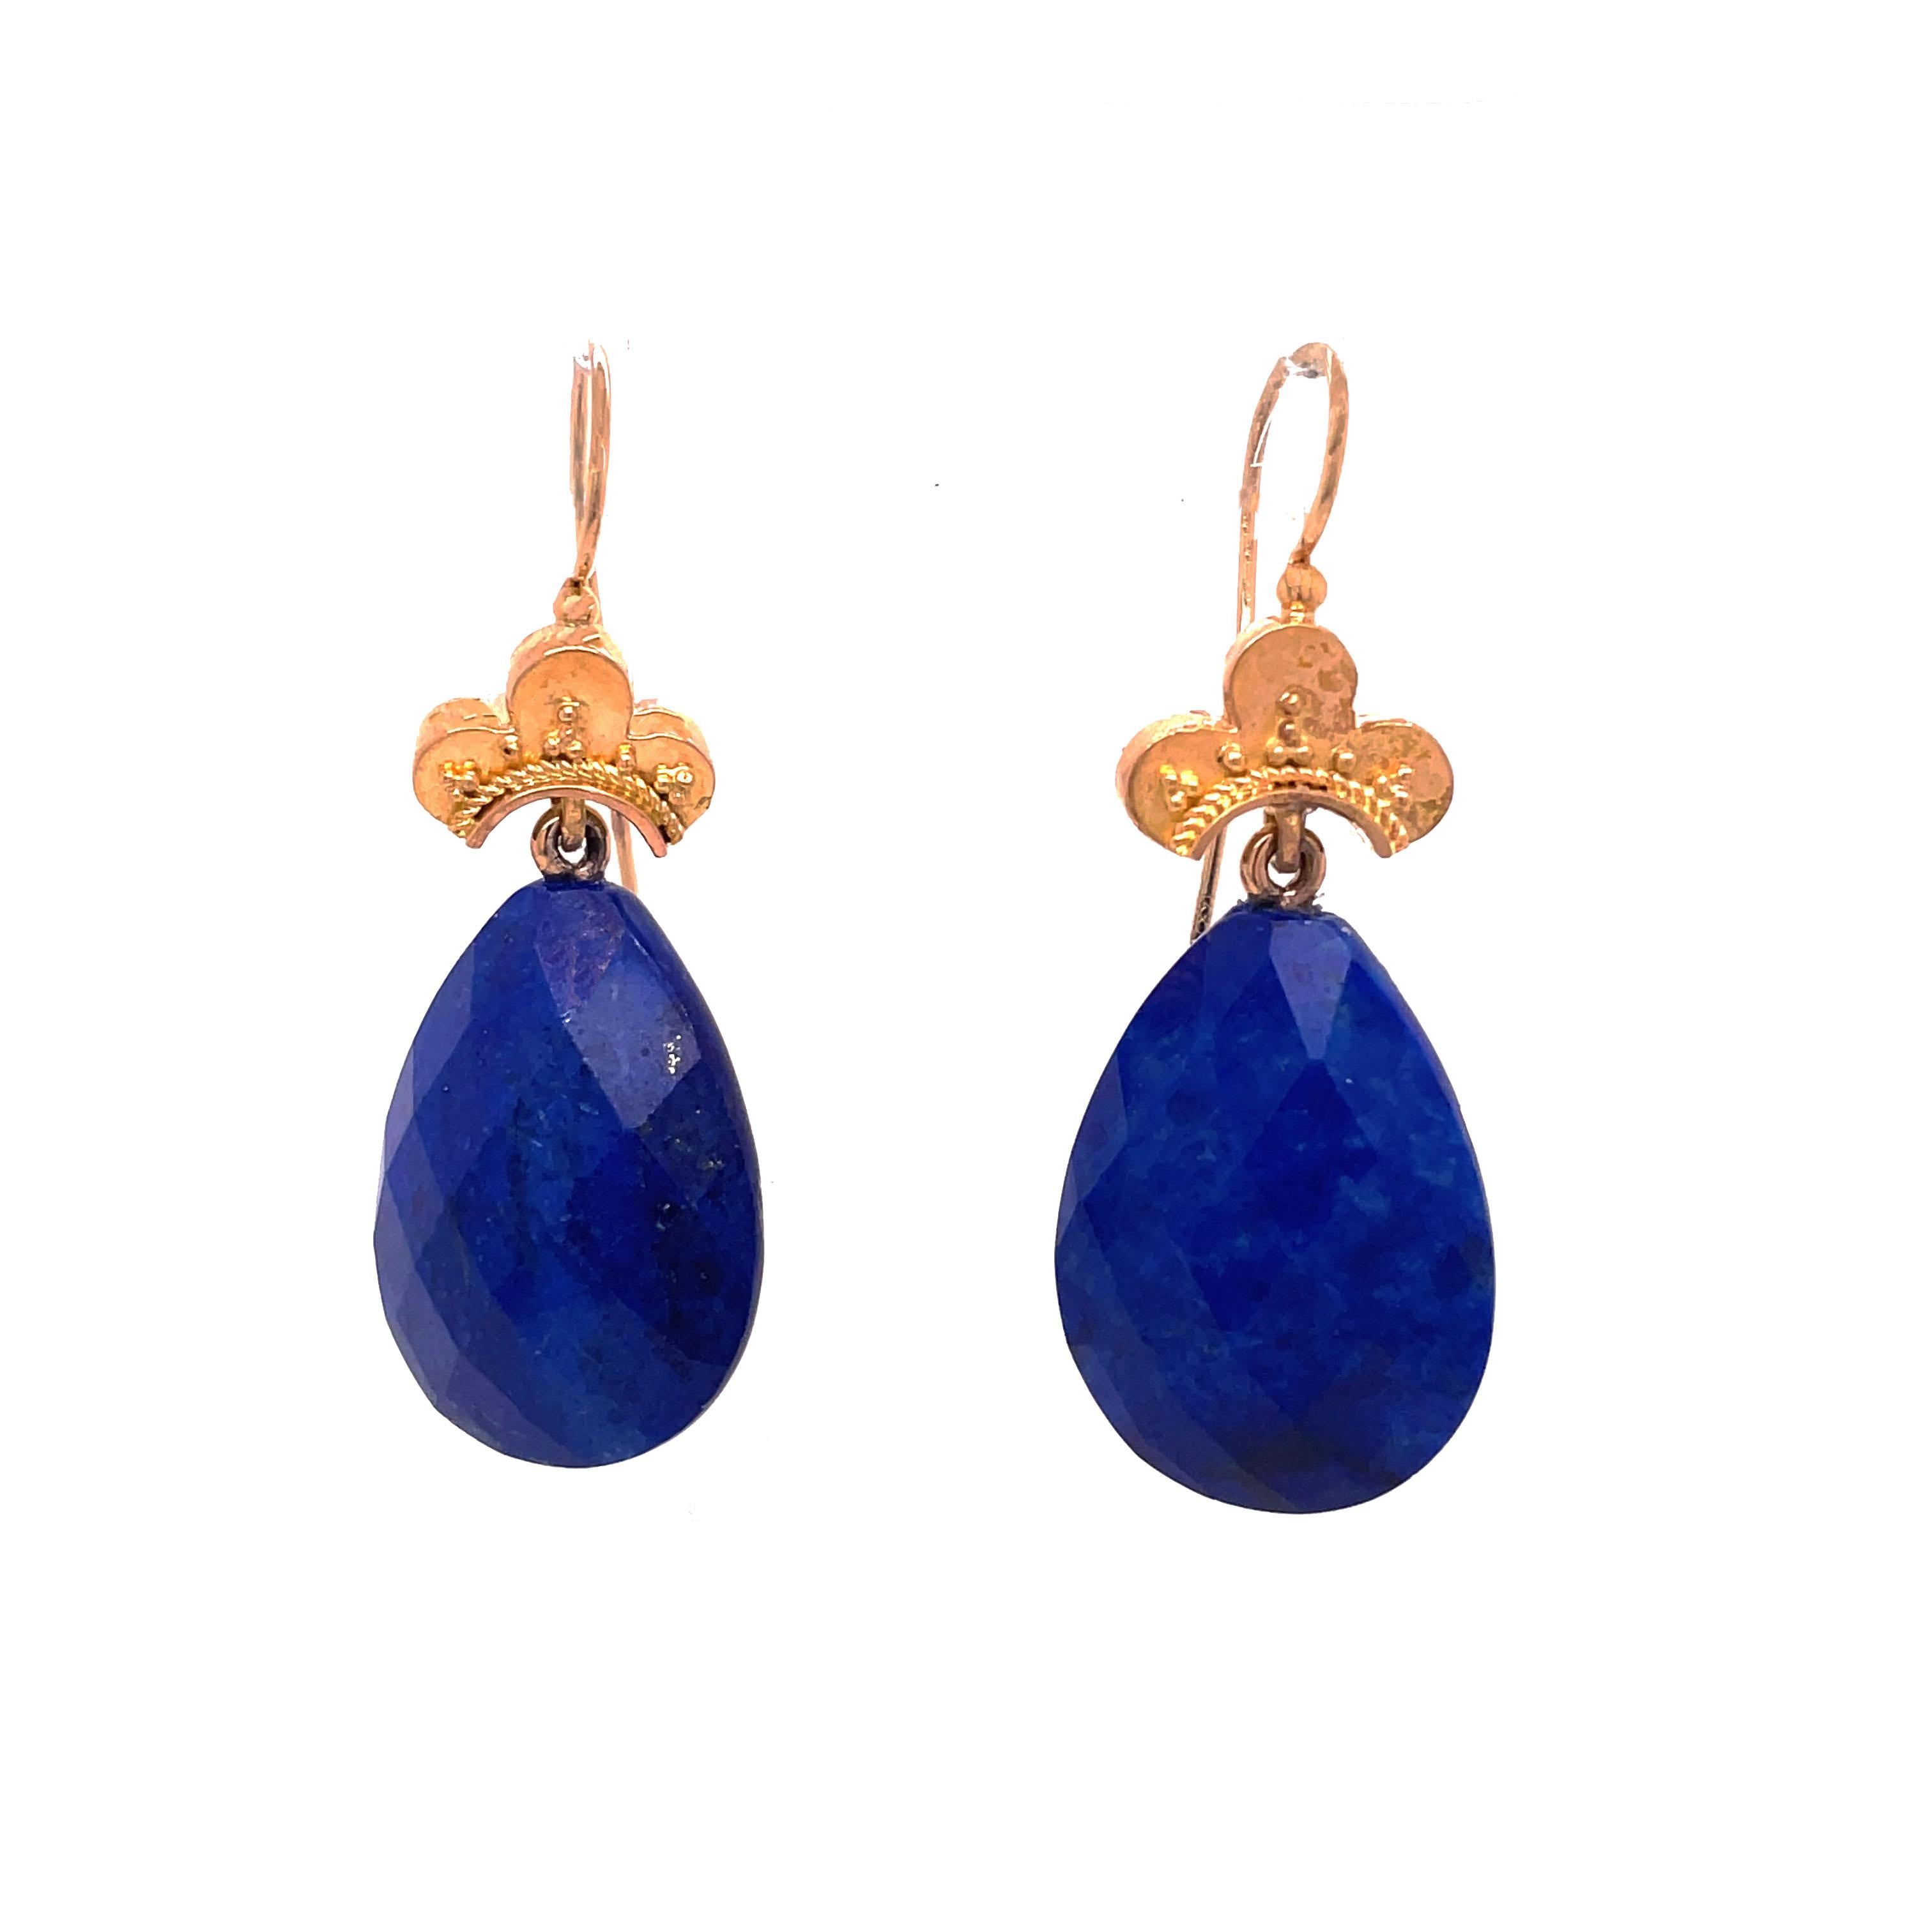 This is a stunning pair of striking blue lapis lazuli Etruscan drop earrings set in a warm 18K yellow gold. The color of the lapis lazuli drops is out of this world, a beautiful rich blue color with golden flakes of color shimmering like stars! The